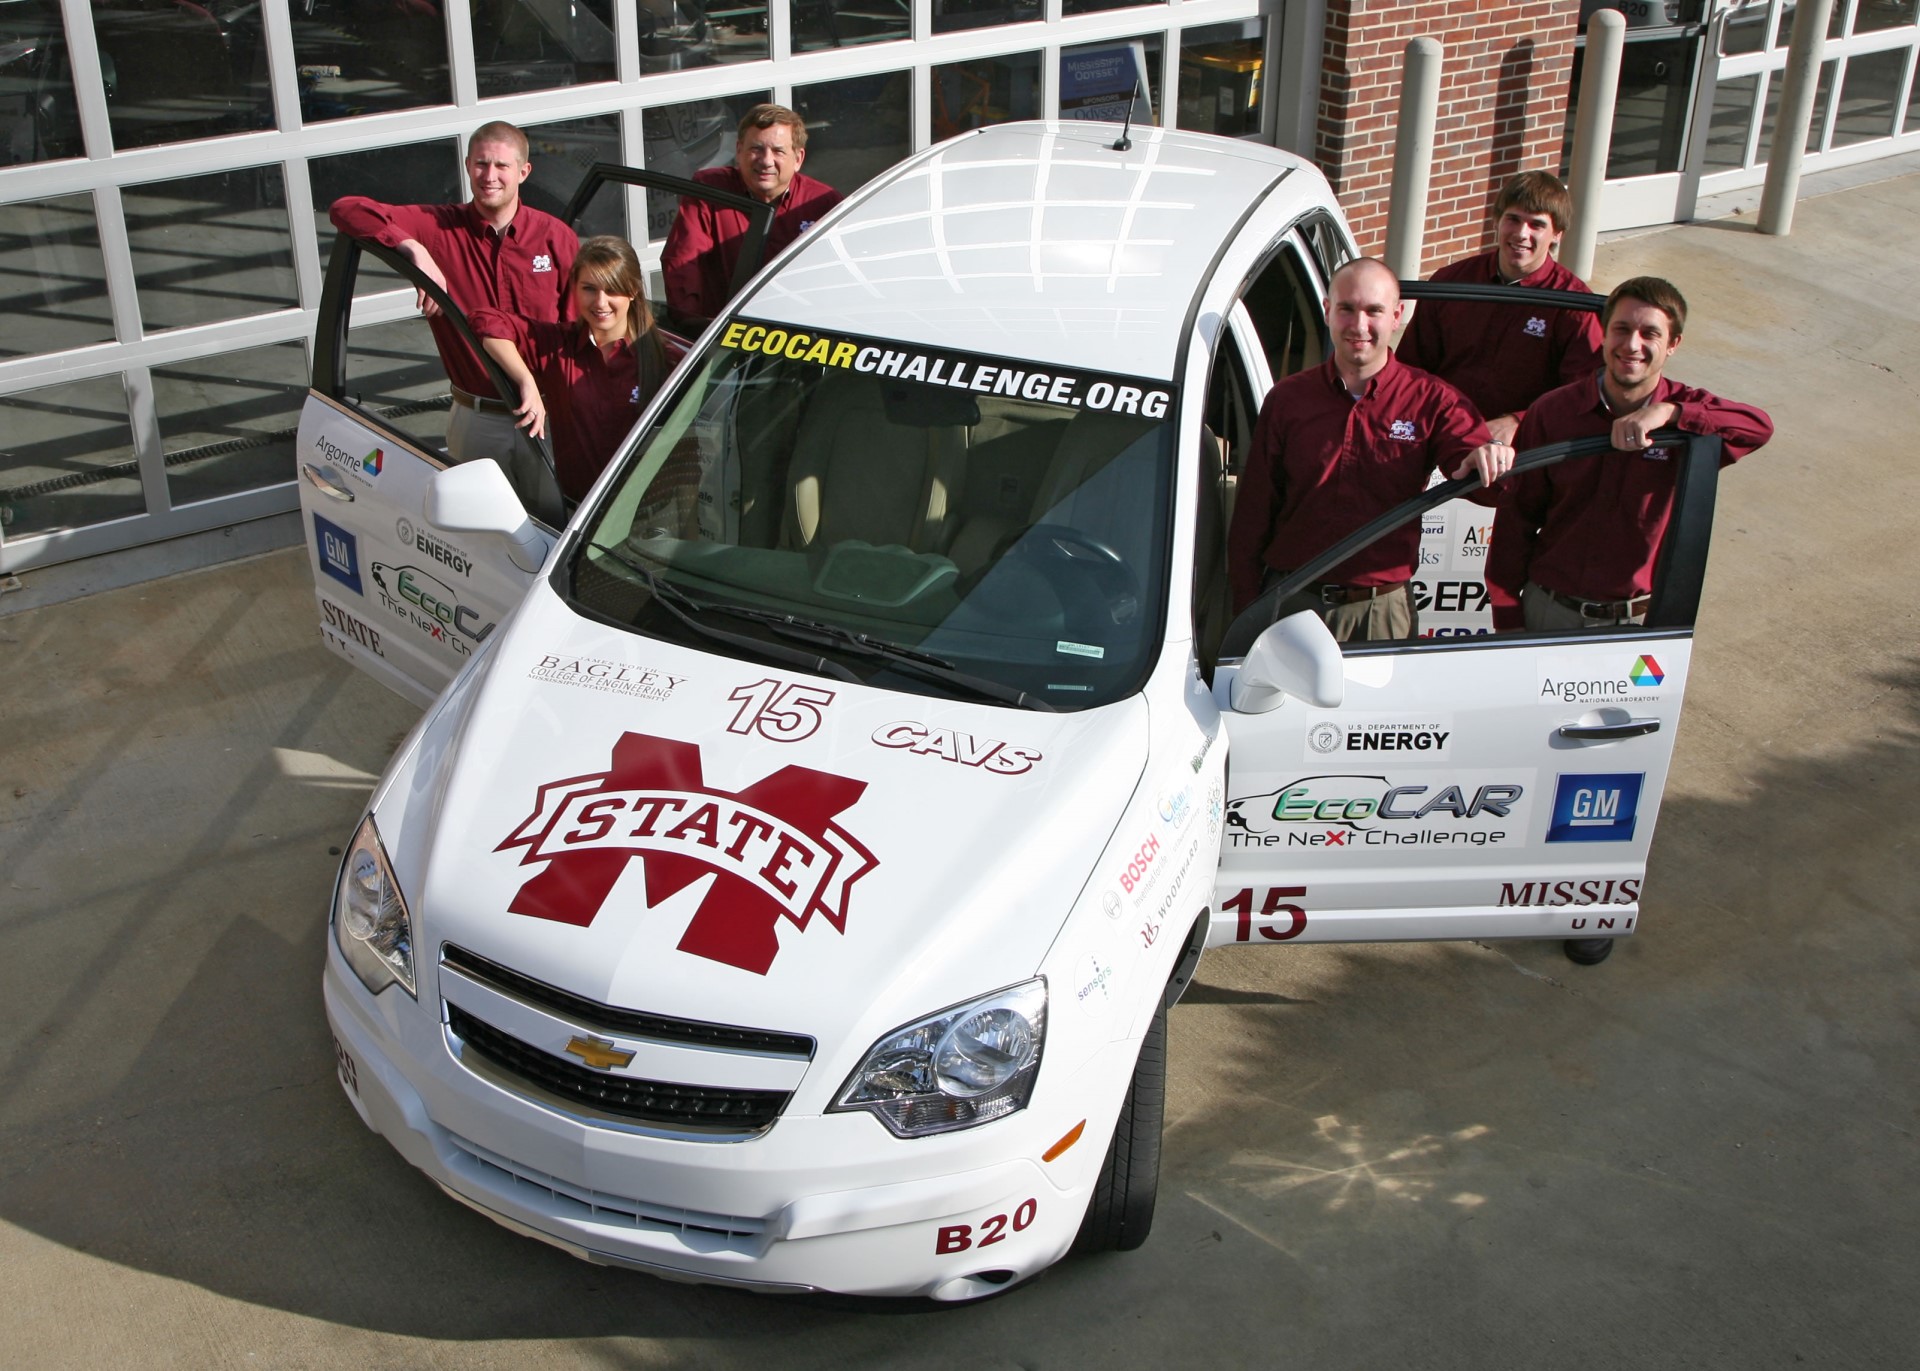 white chevy ecocar and team